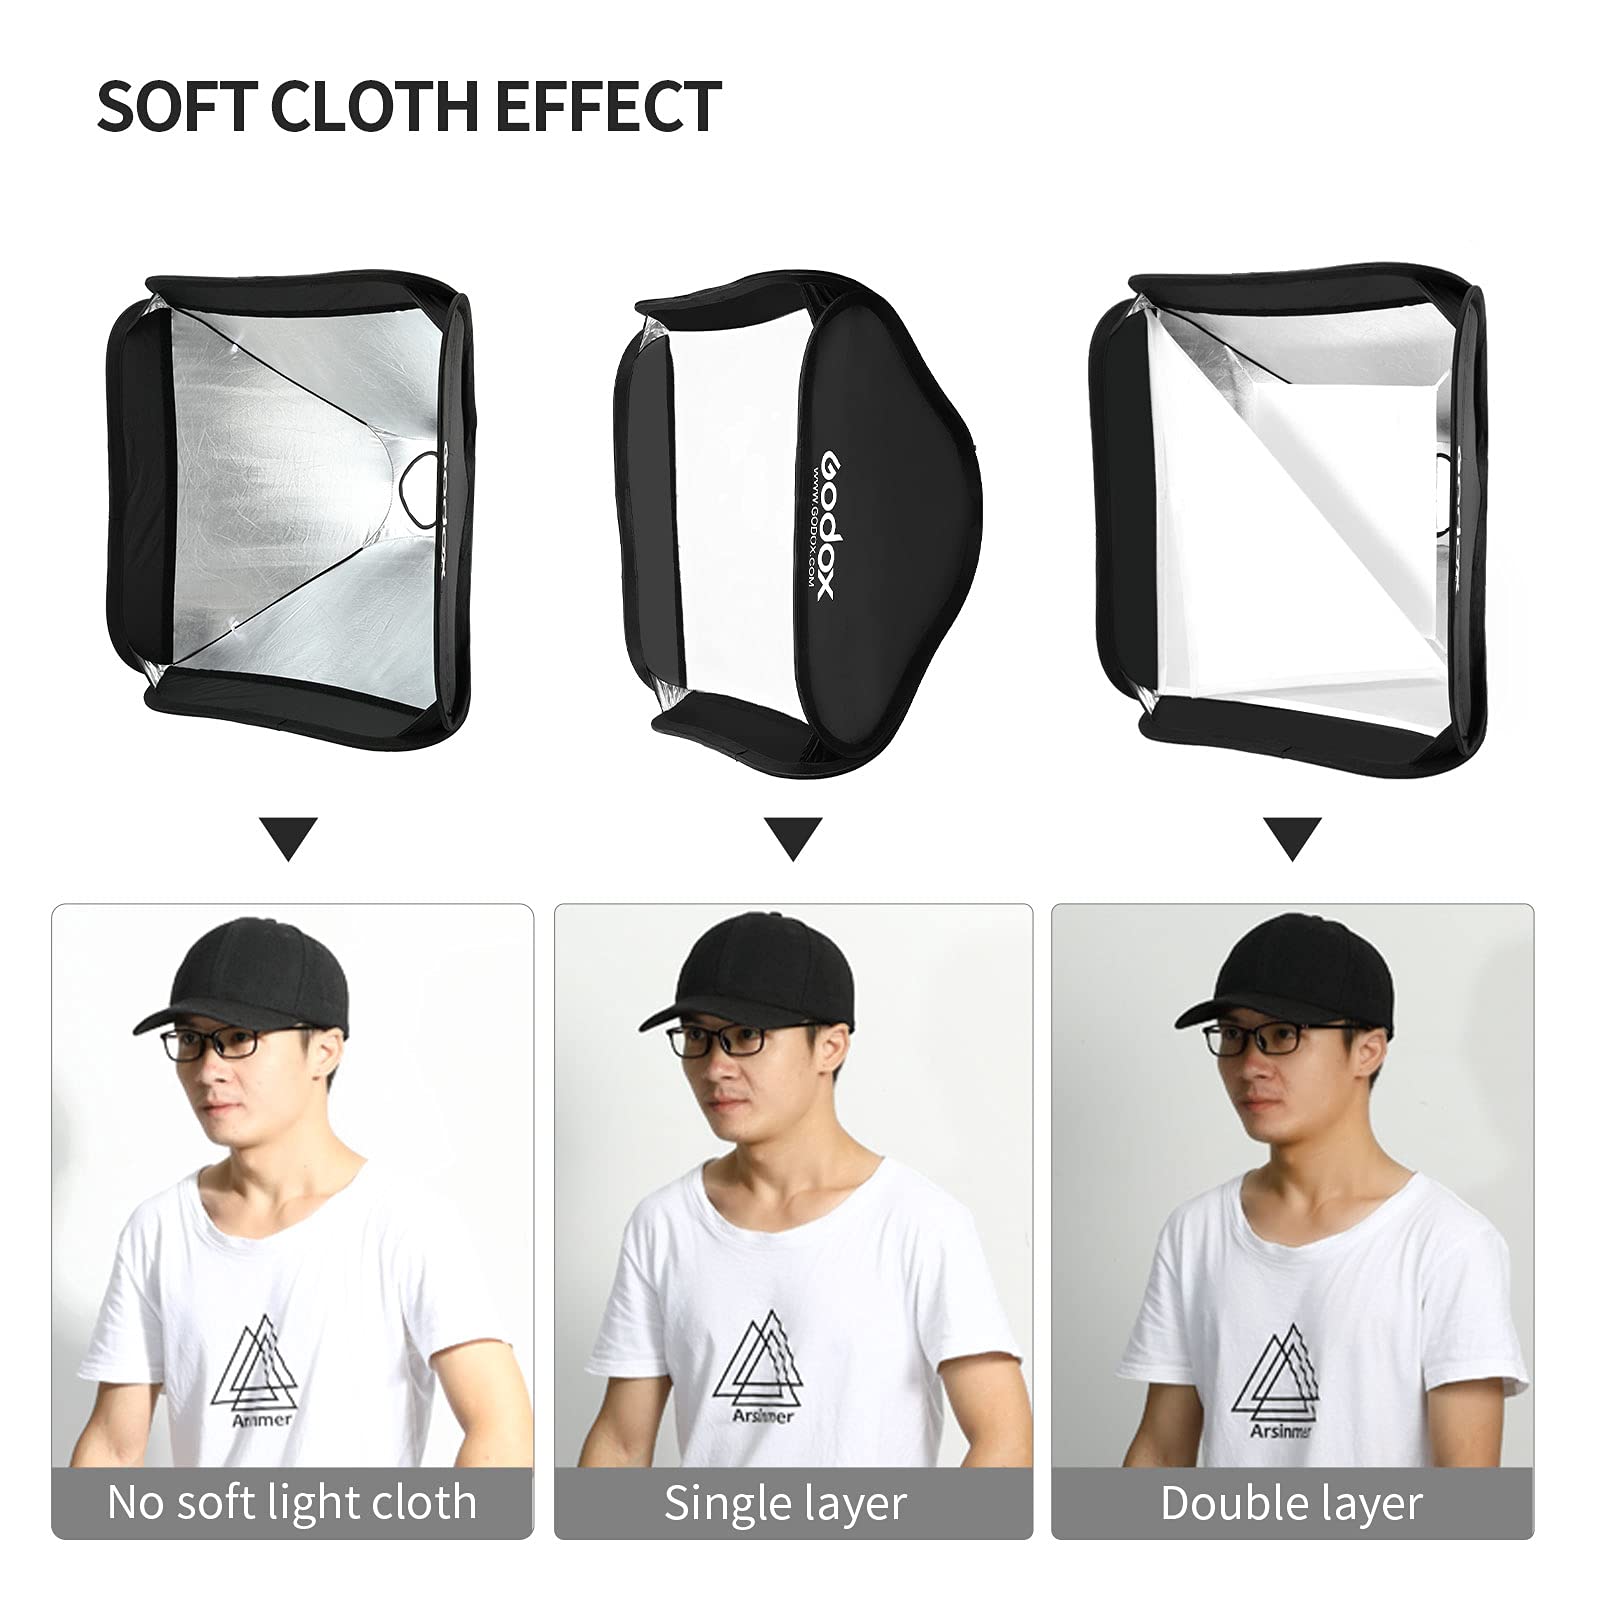 Godox 32"x 32" /80x80cm Foldable Flash Softbox Kit with Grid, S-Type Speedlite Bracket Bowens Mount and Carring Case for Camera Flash Speedlight Studio Portraits,Product Photography,Video Shooting